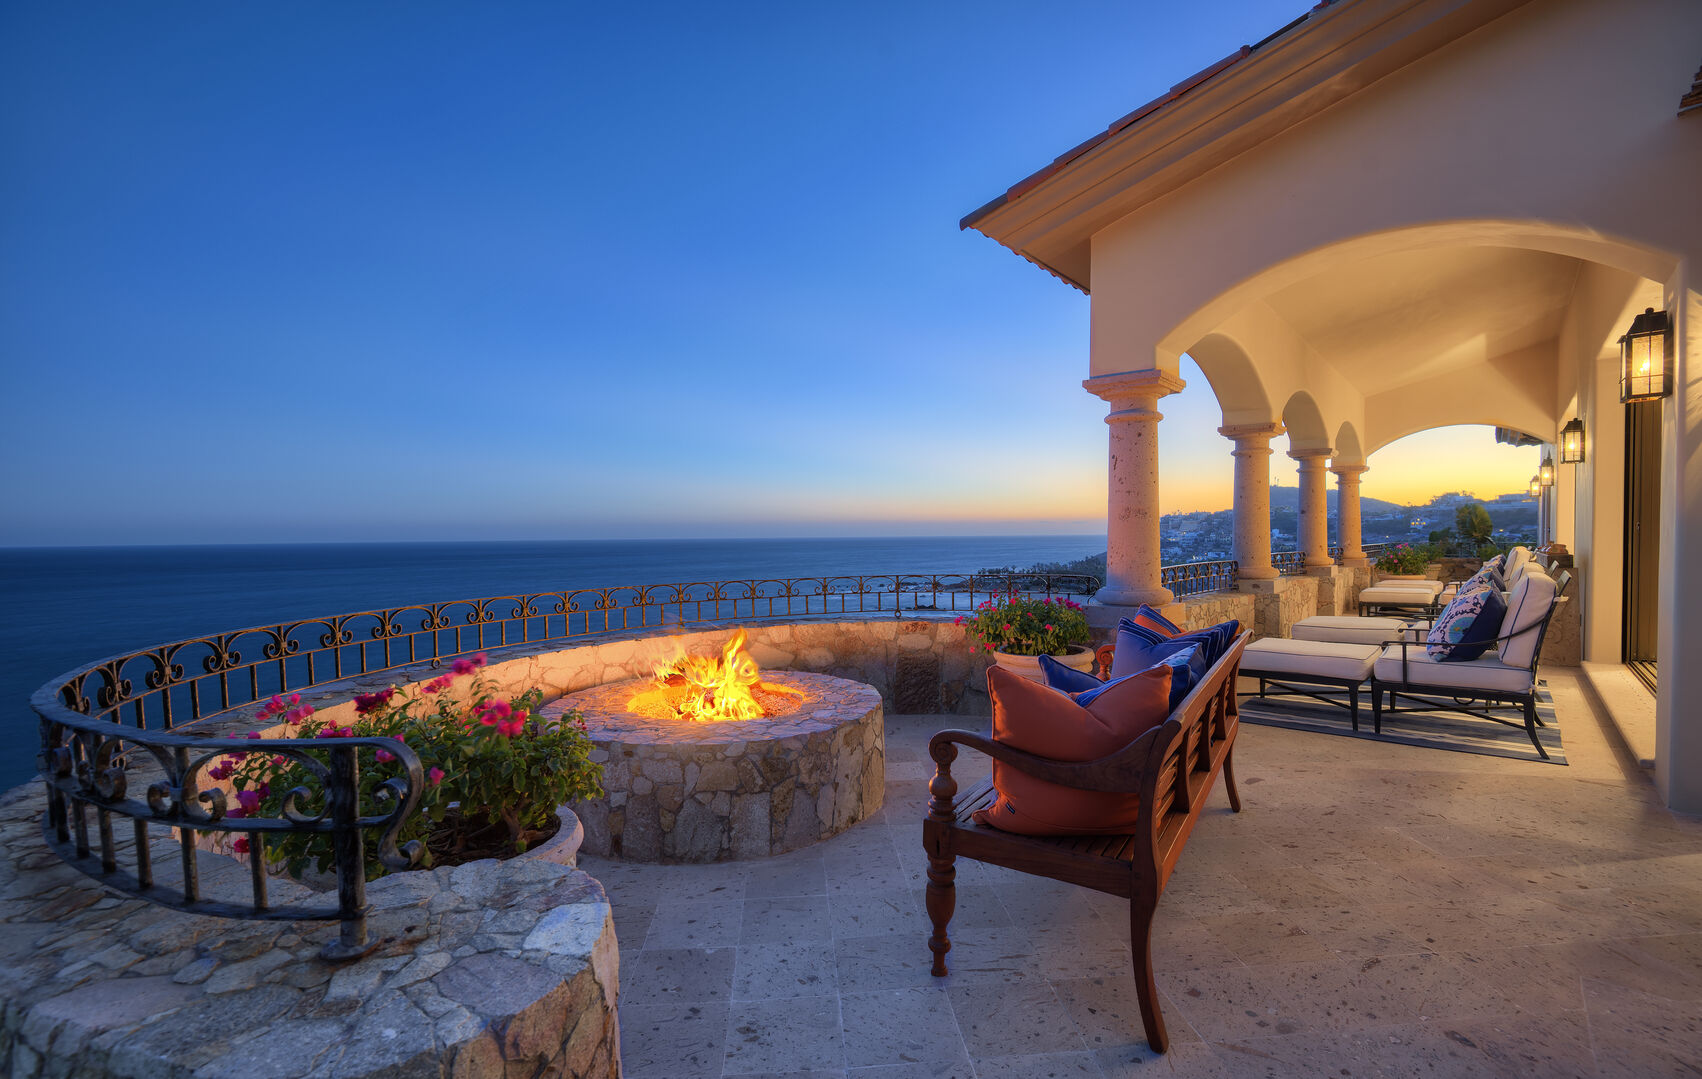 Firepit outside this villa in Los Cabos at sunset